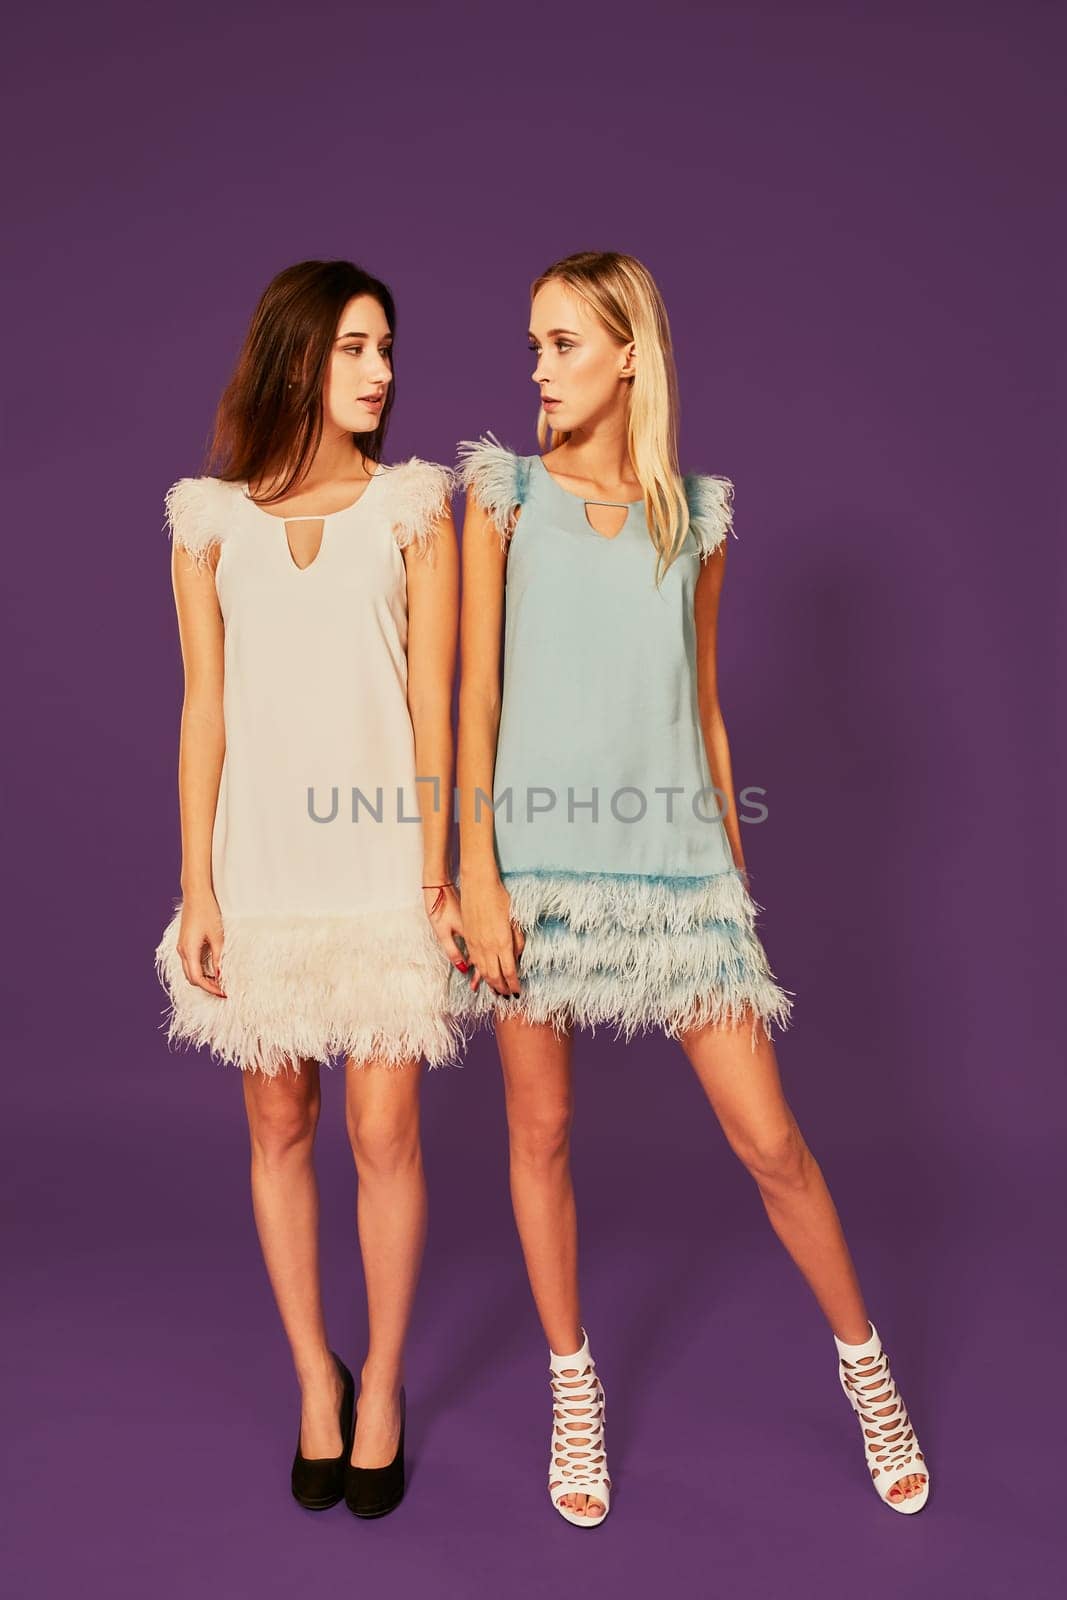 Studio fashion portrait of two elegant young women in cocktail light dresses posing in studio. Blonde and brunette hold hands, Black and white shoes